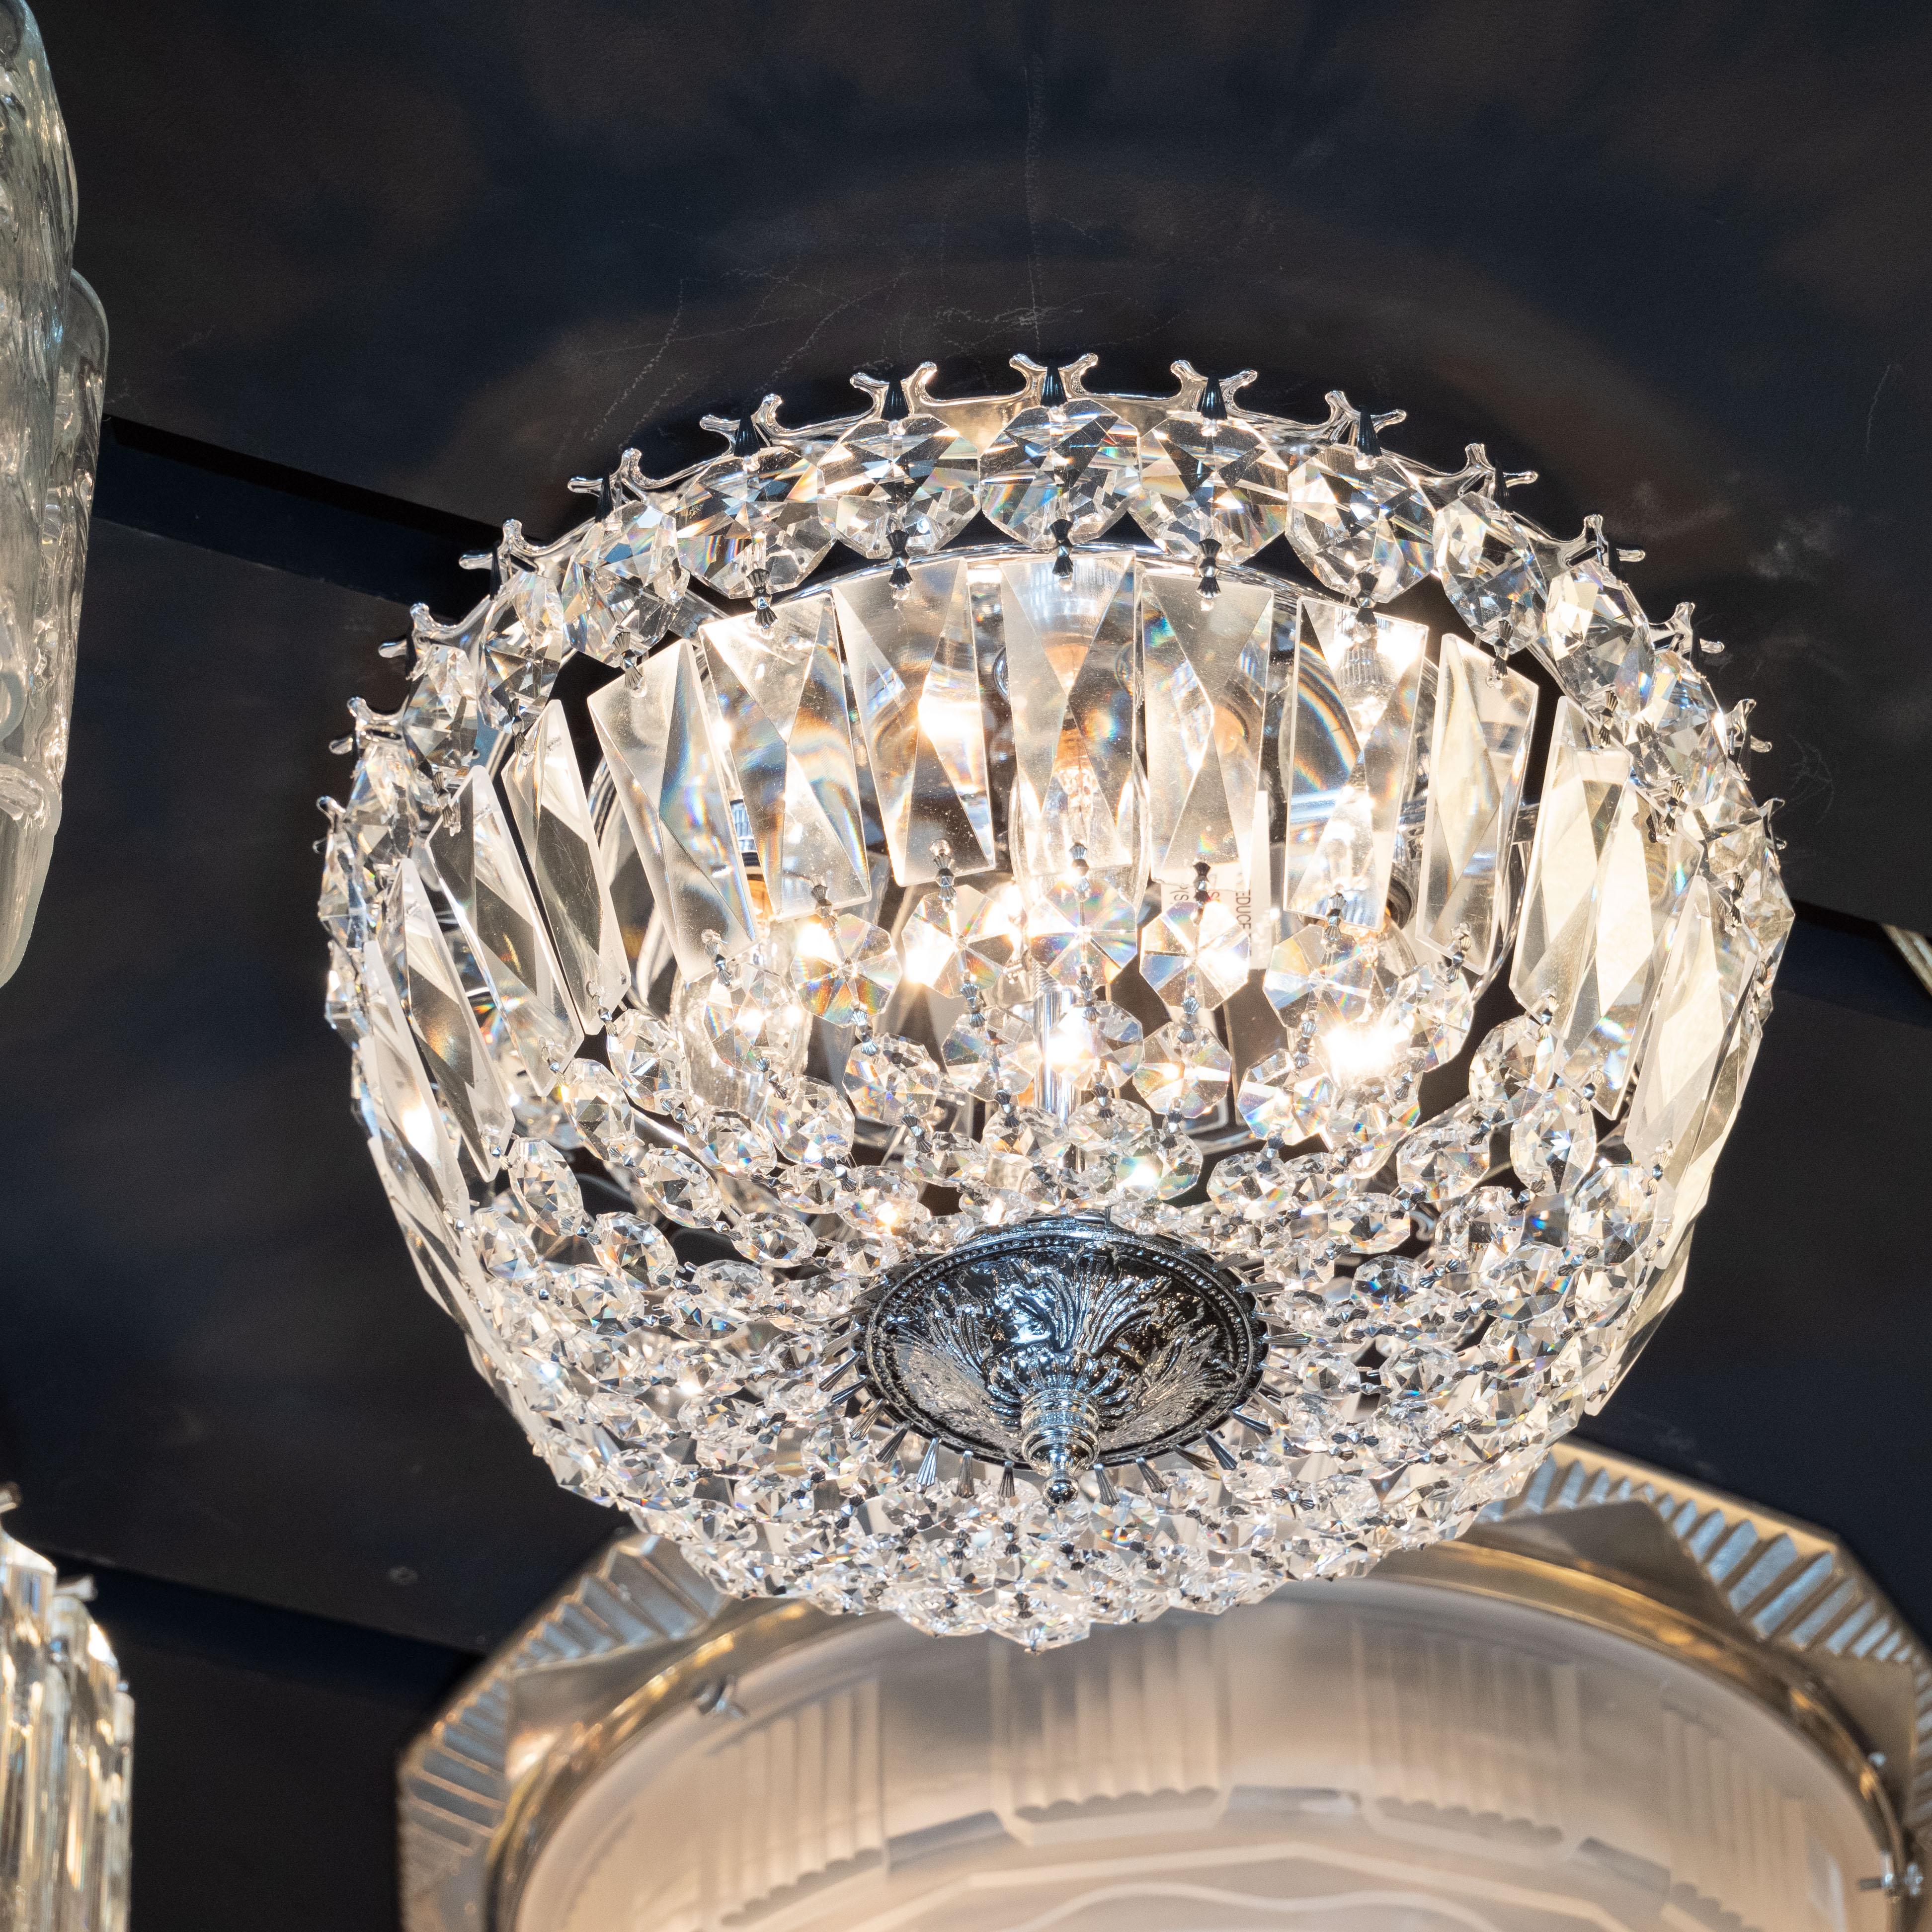 Hollywood Regency 1940s Hollywood Faceted Crystal Flush Mount Chandelier with Silvered Fittings